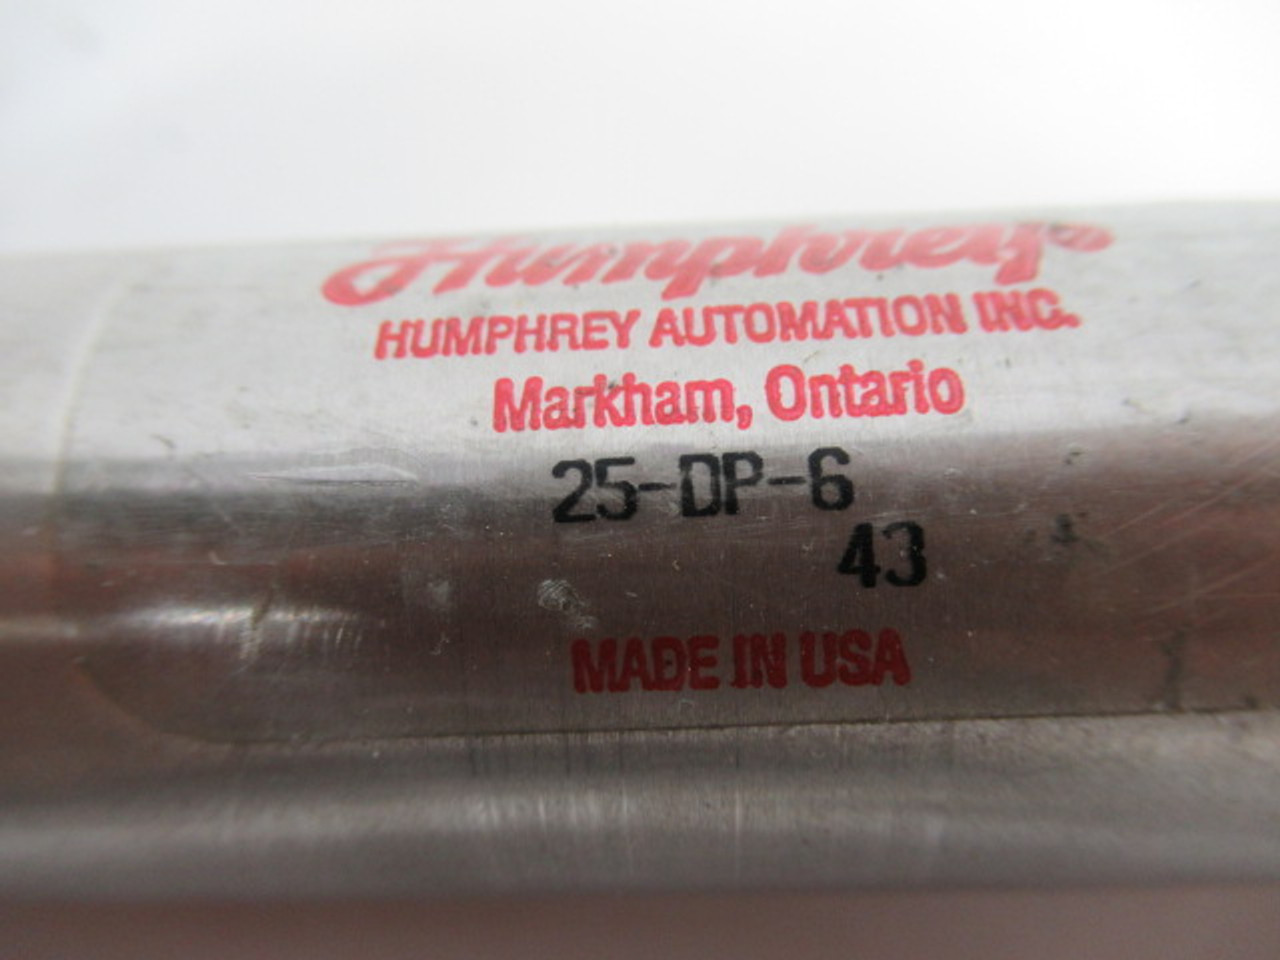 Humphrey 25-DP-6 Pneumatic Cylinder 25mm Bore 6" Stroke USED